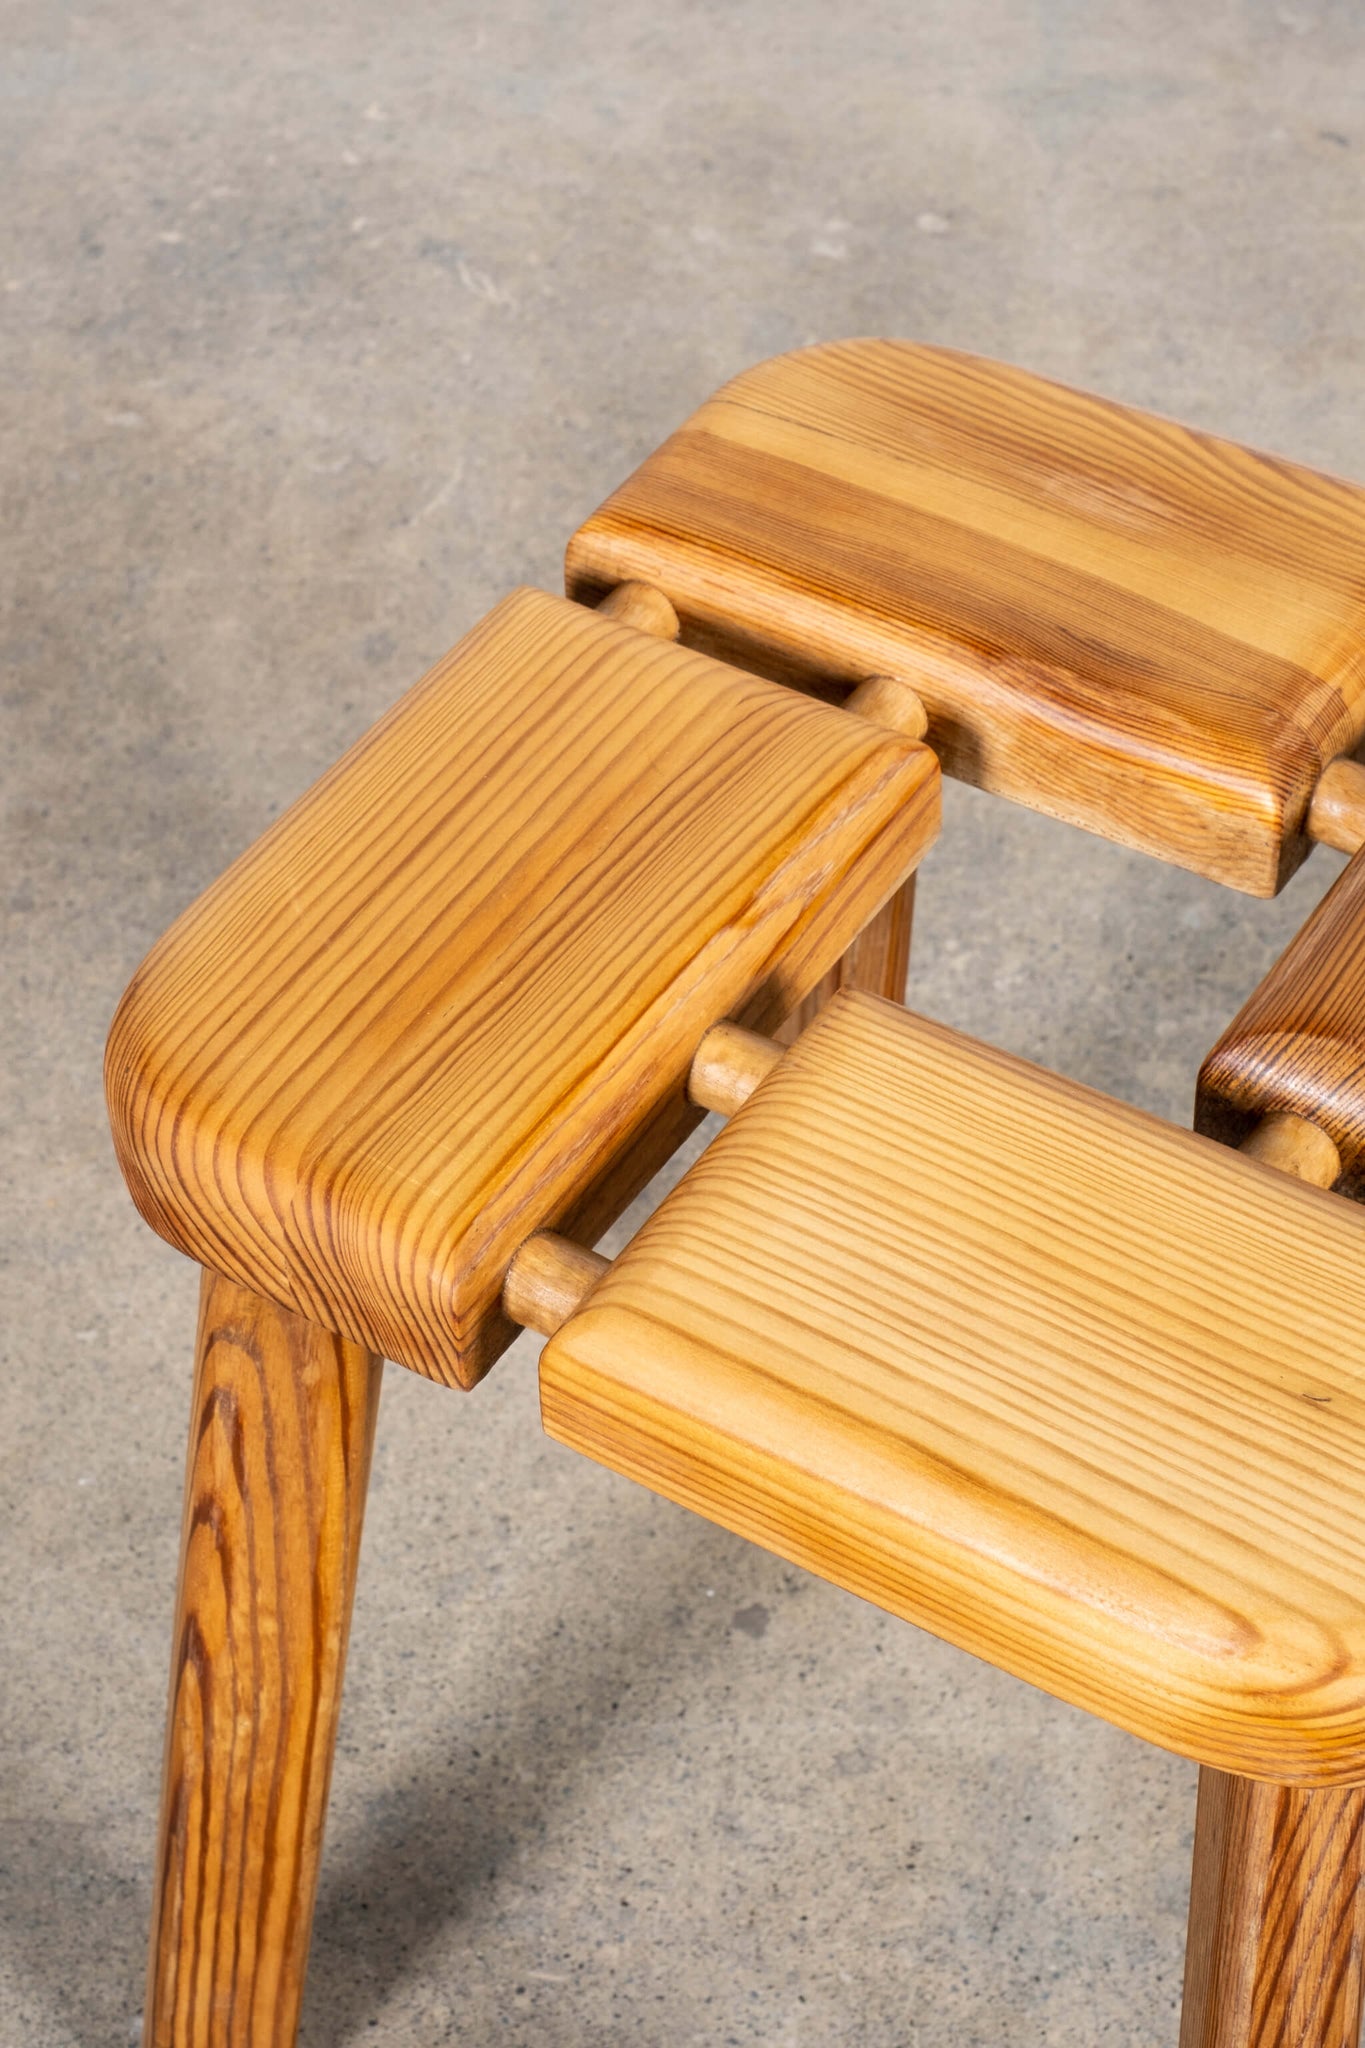 Vintage Pine Sauna Stool with Exposed Dowel Detail, seat detail close up